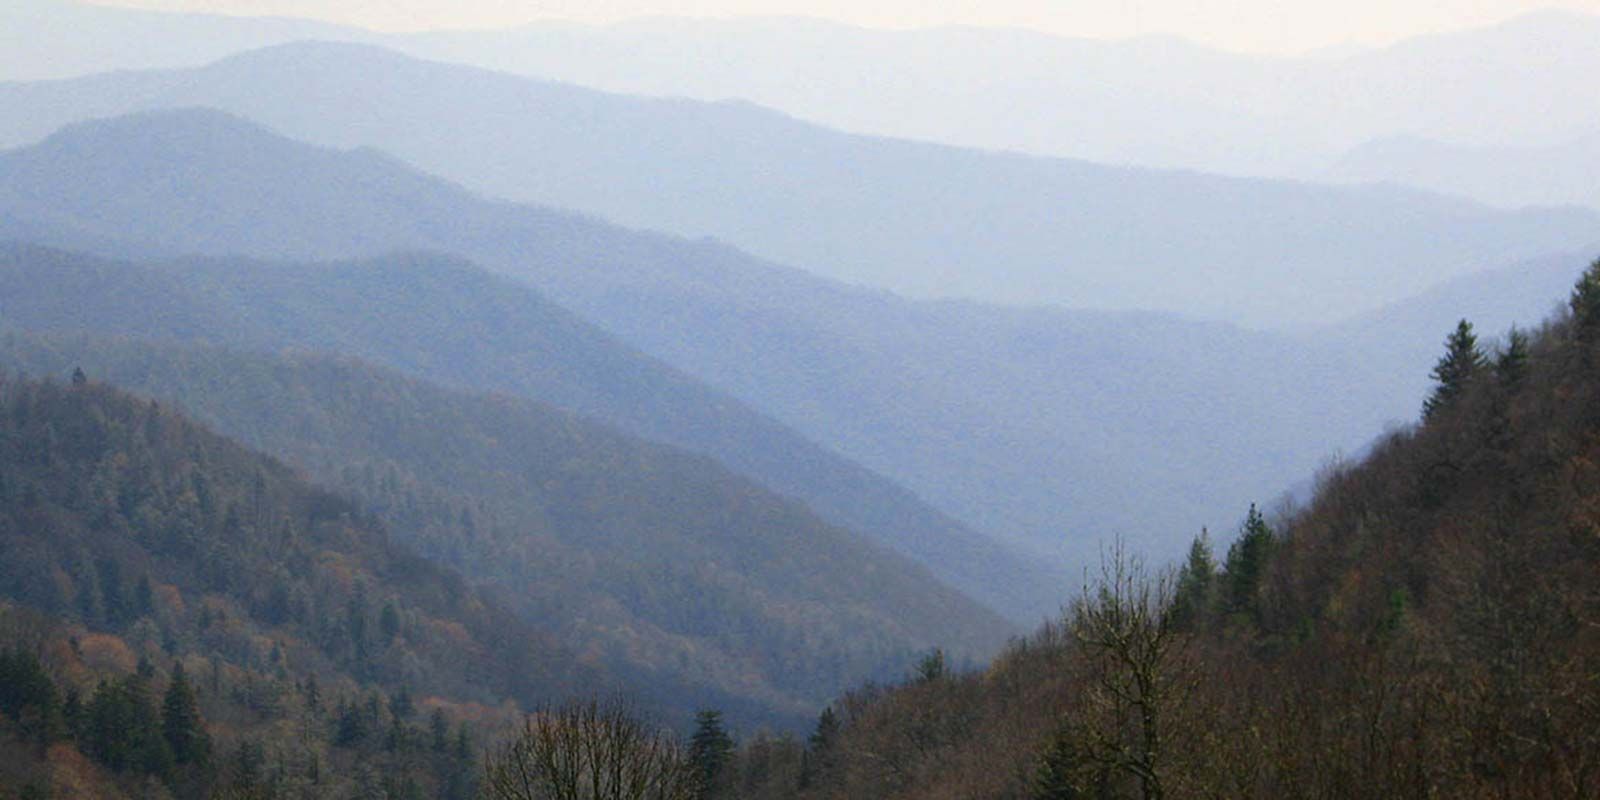 A view of a mountain range with trees in the foreground and mountains in the background.